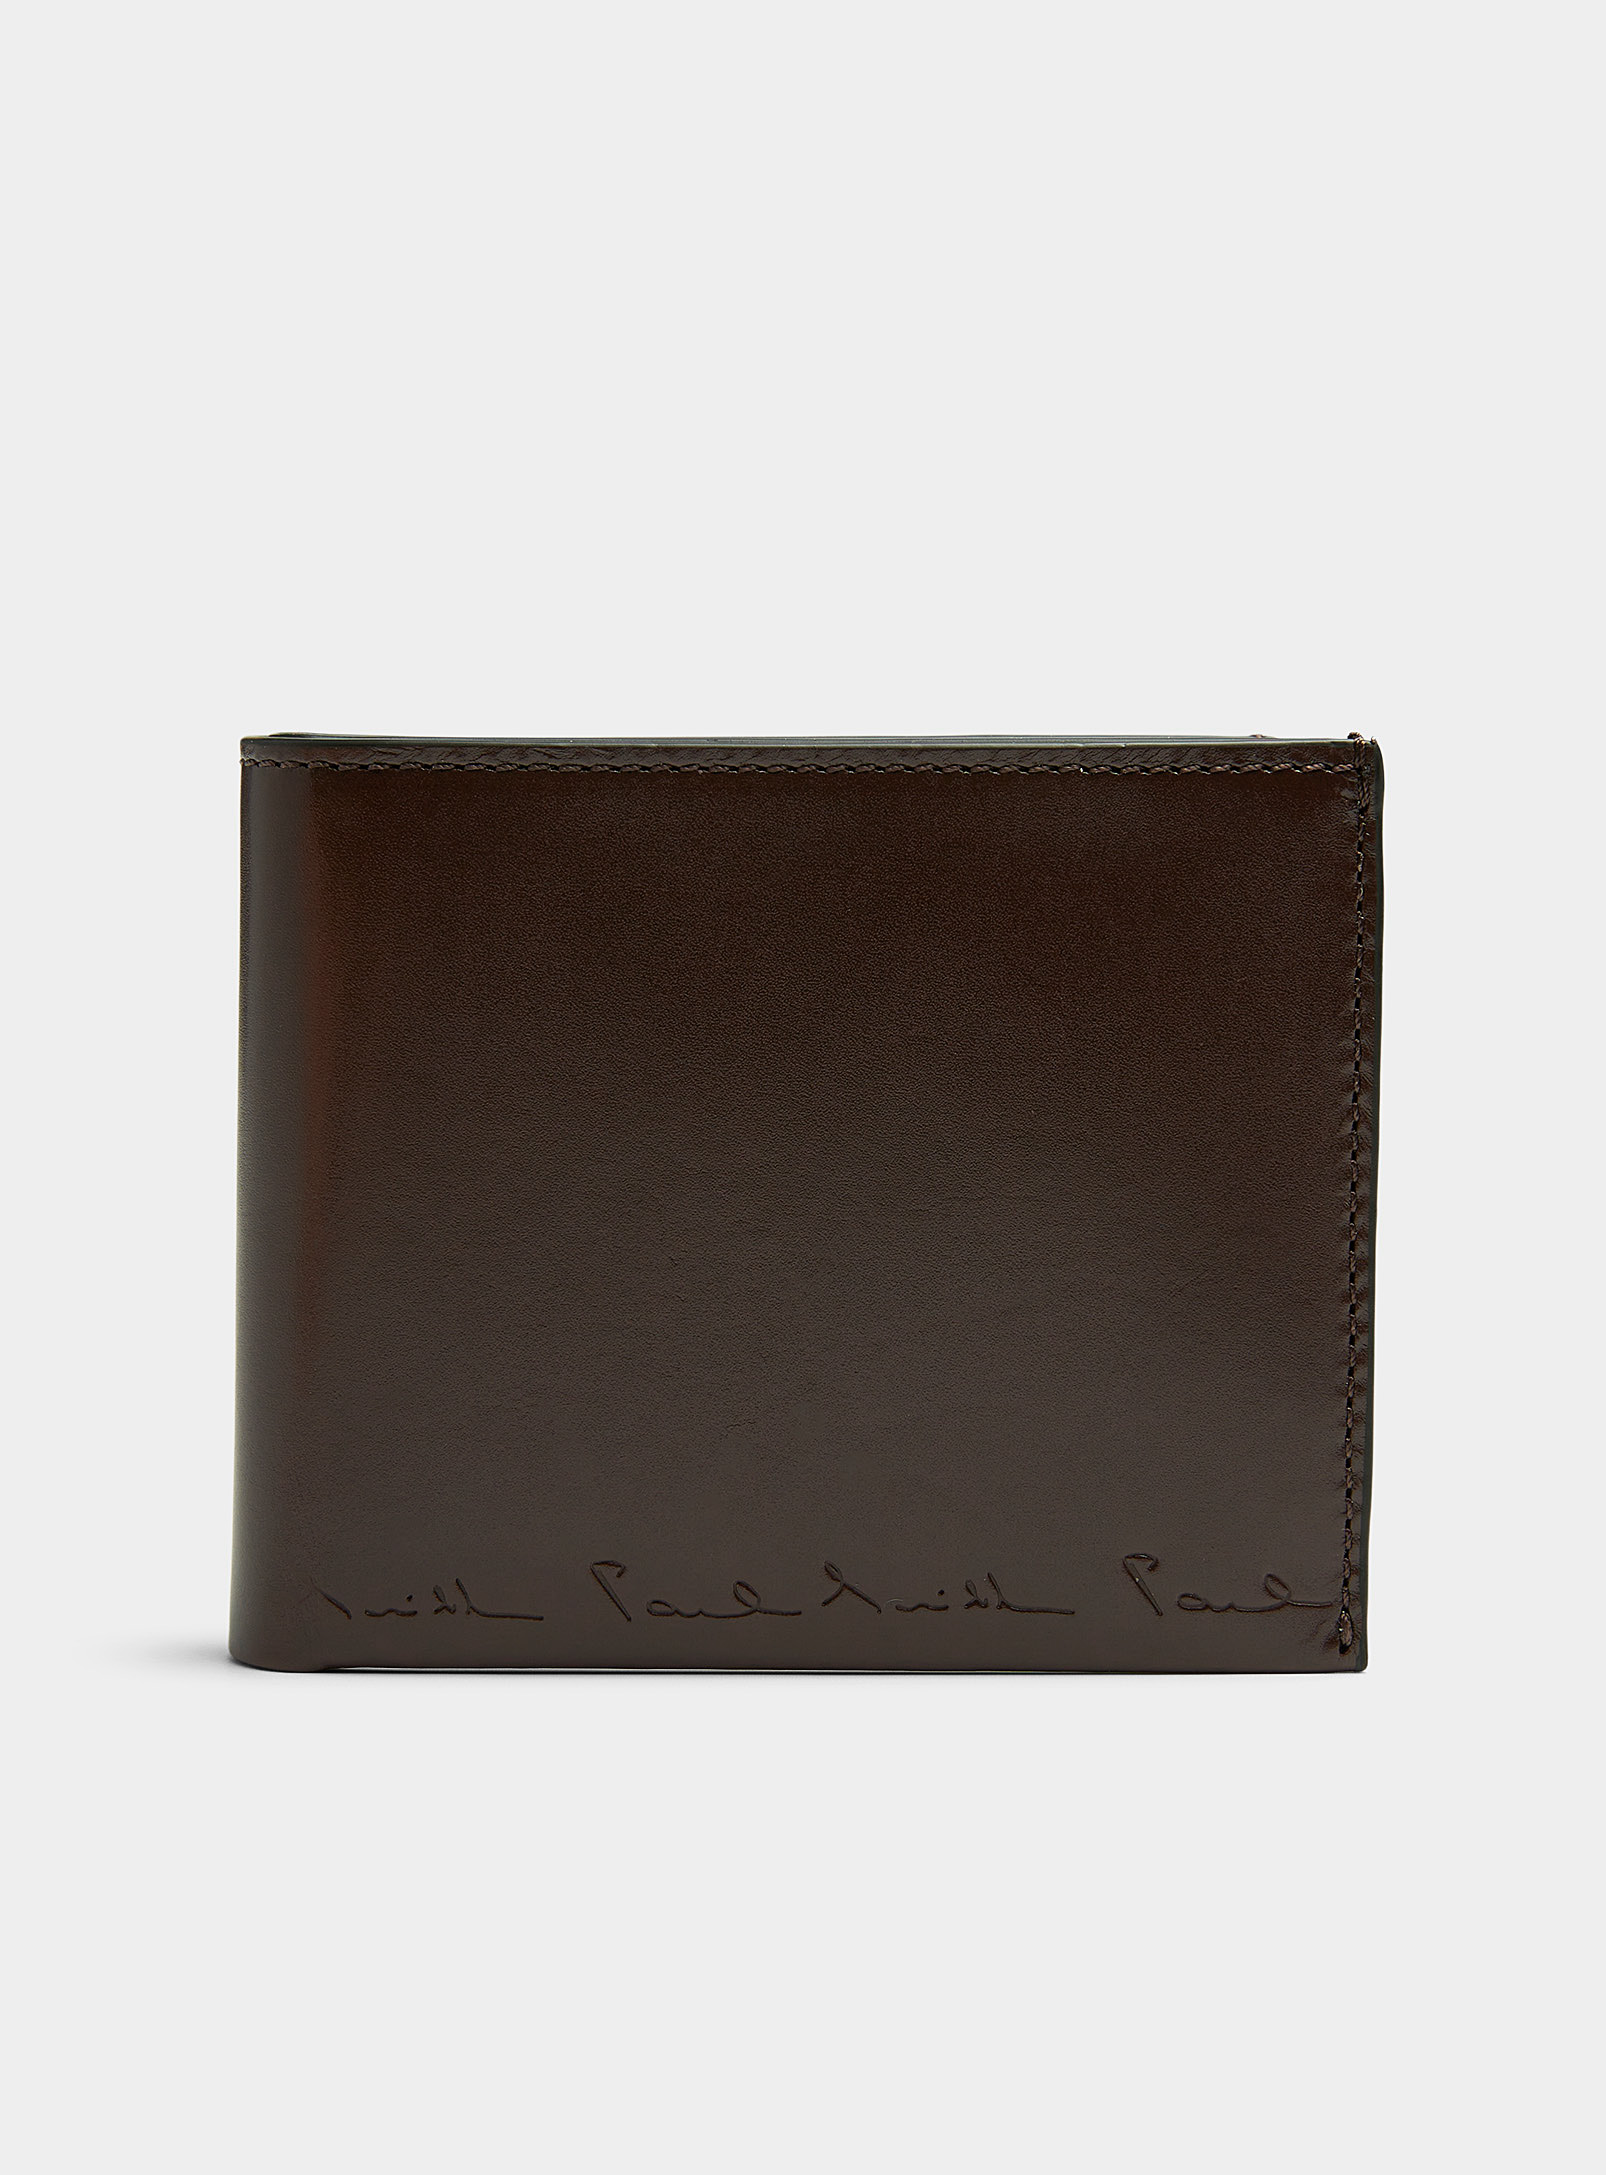 Paul Smith - Men's Smooth brown leather wallet